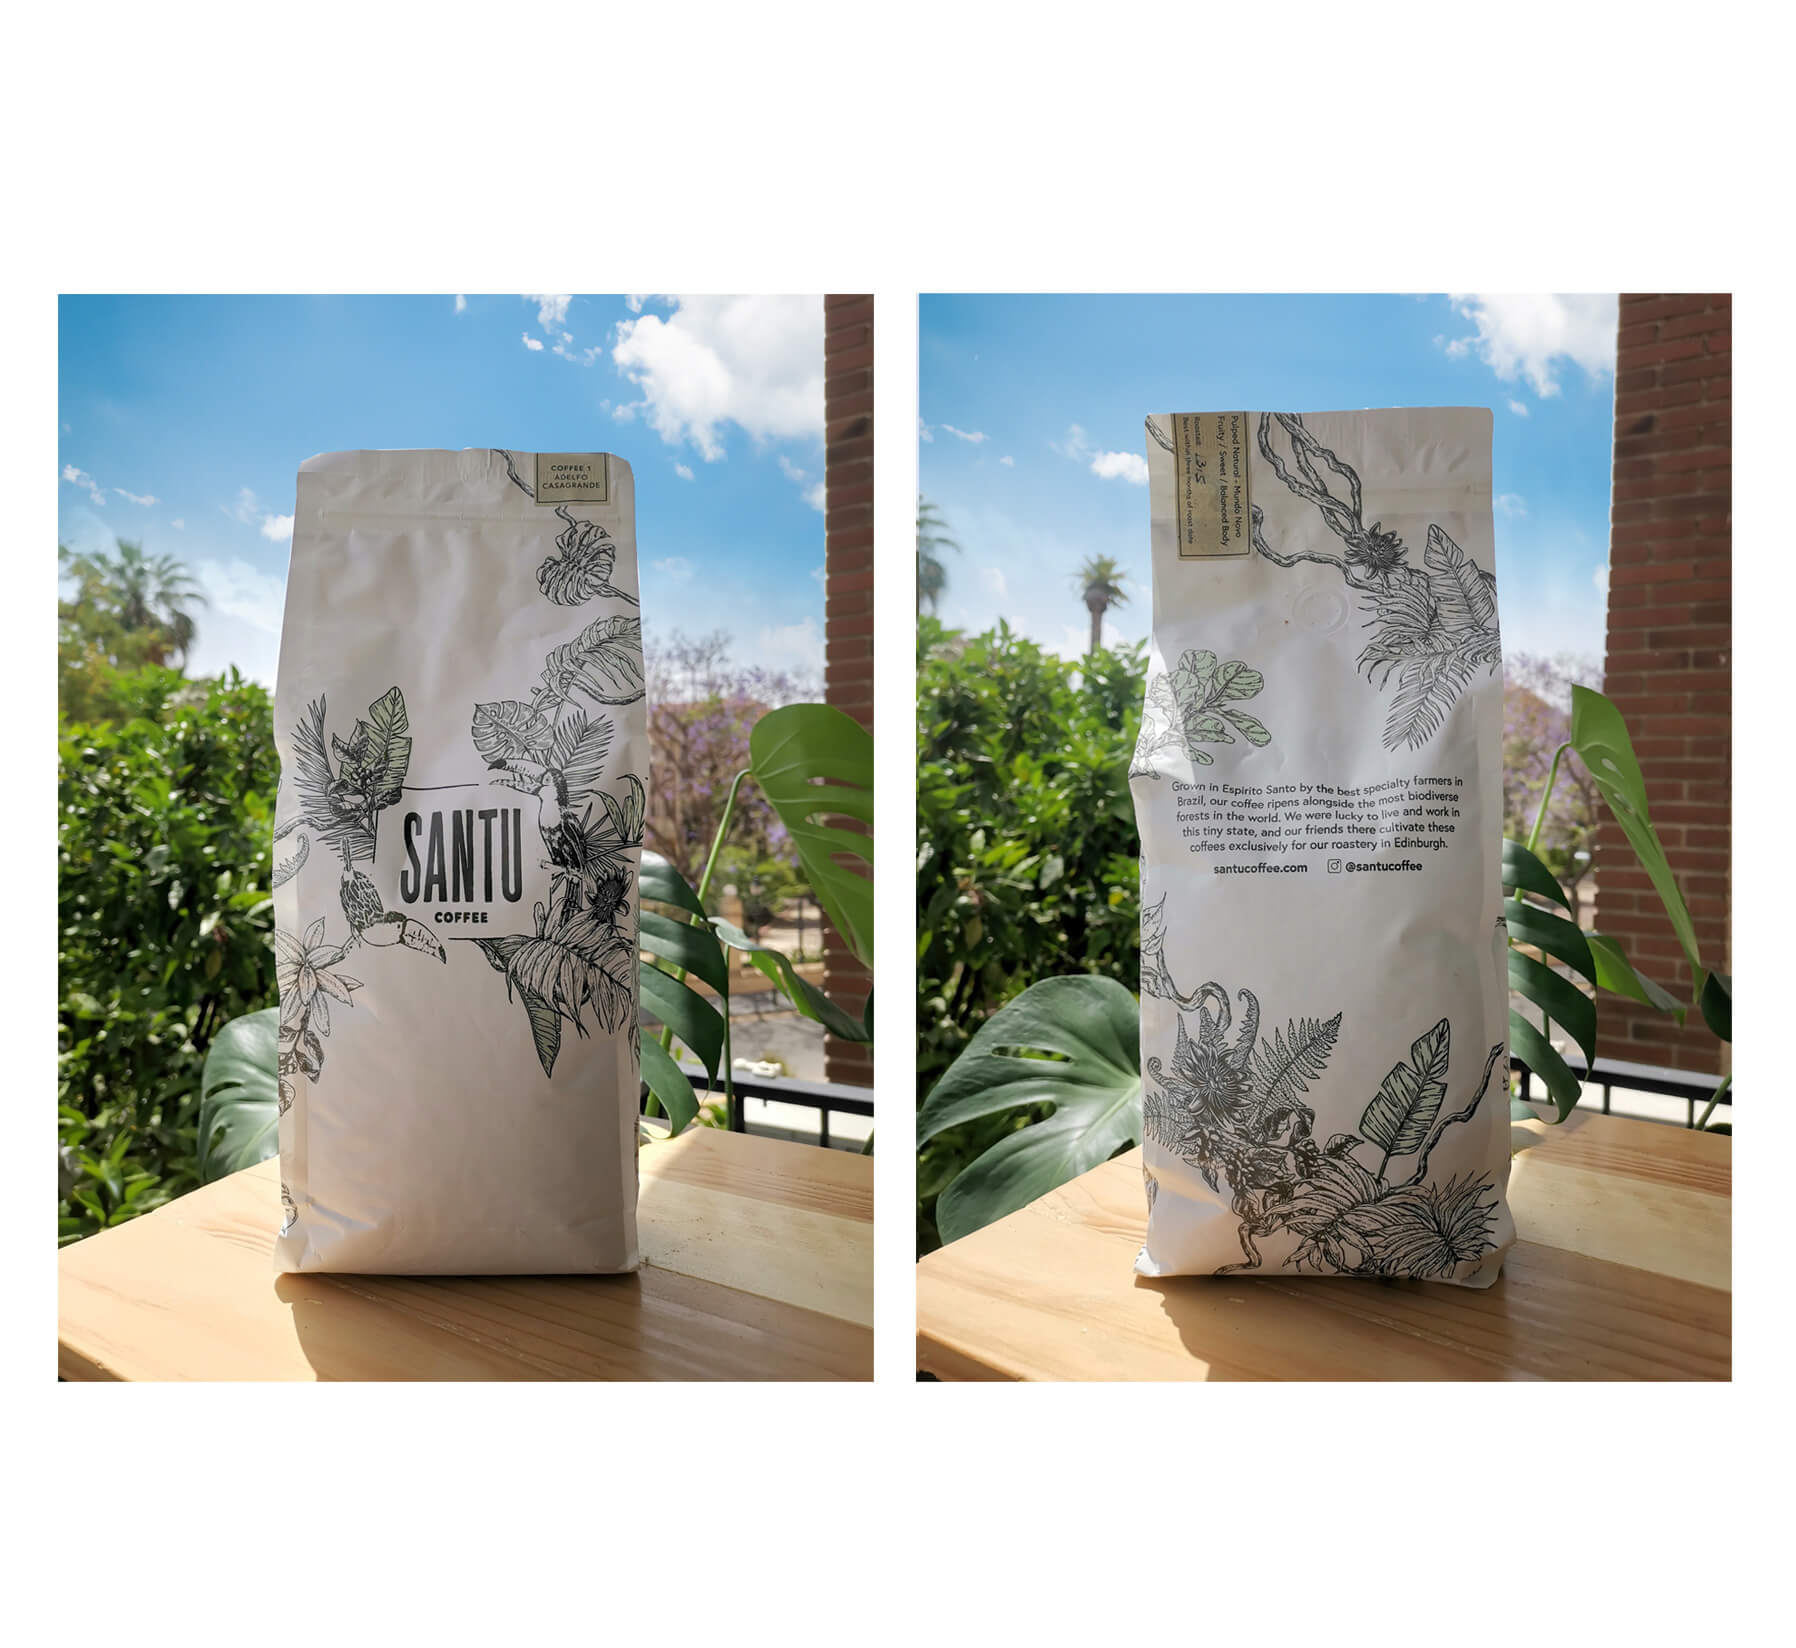 1kg white coffee packaging with design of Brazilian plants and animals, sitting on a table with plants and blue sky